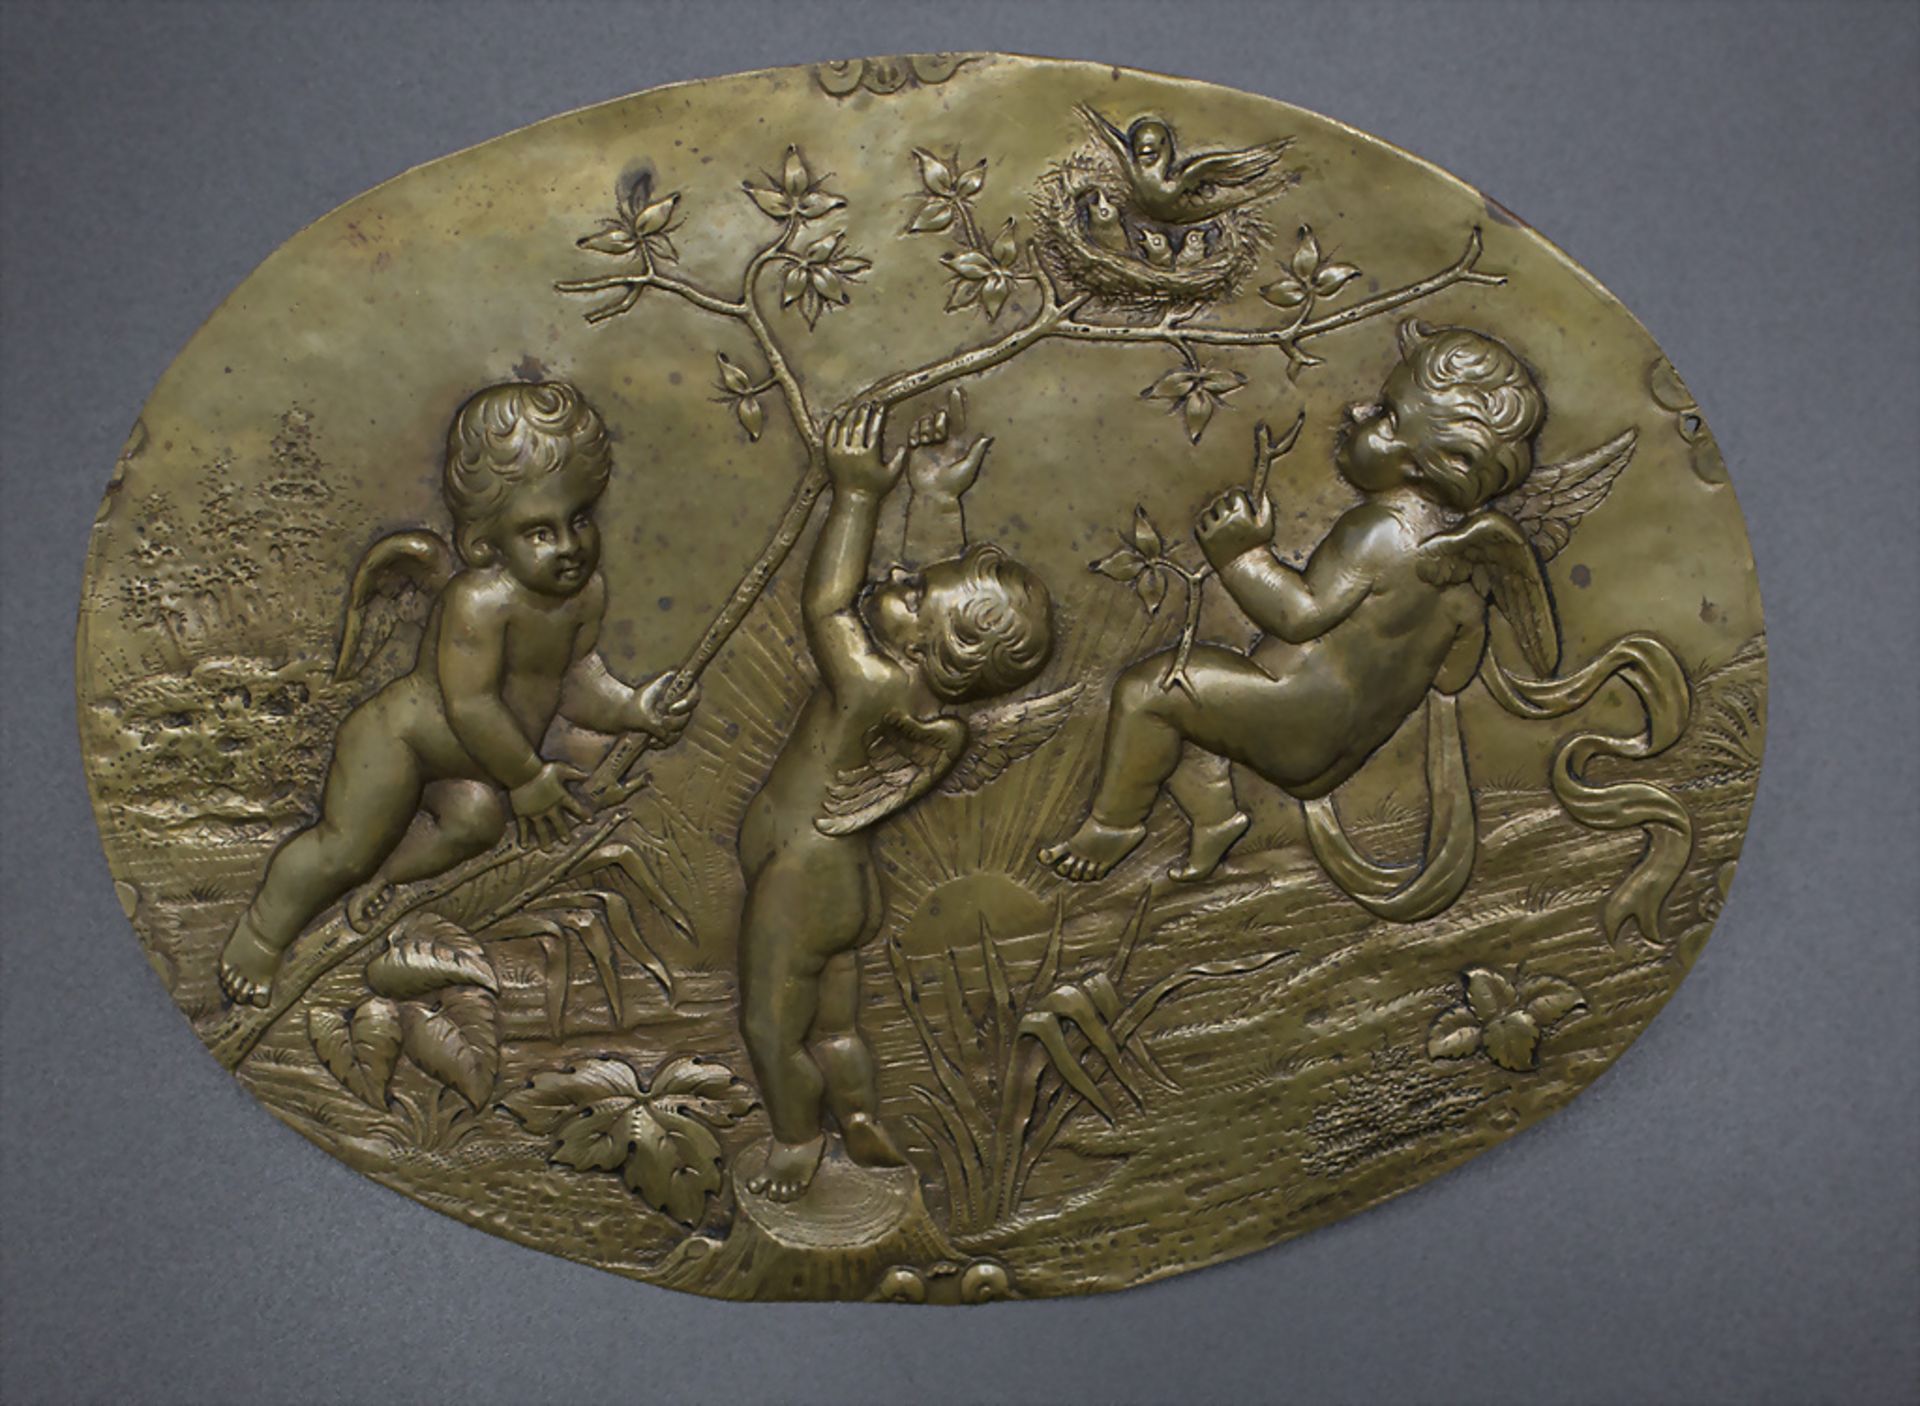 Relief mit Putten / A relief with putti, 18./19. Jh.